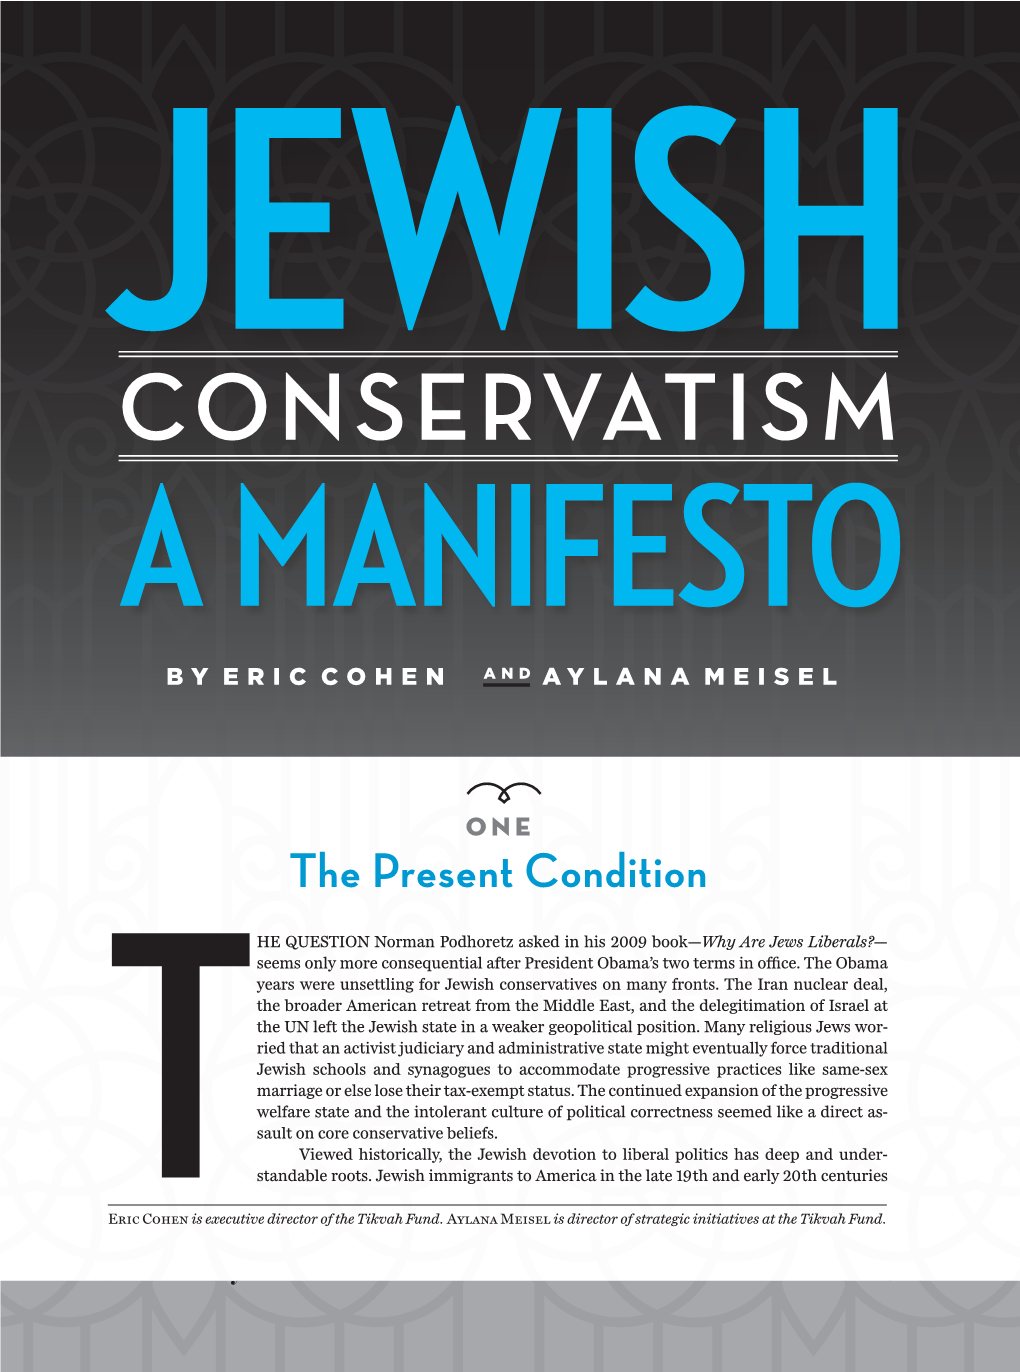 Conservatism a Manifesto by Eric Cohen and Aylana Meisel